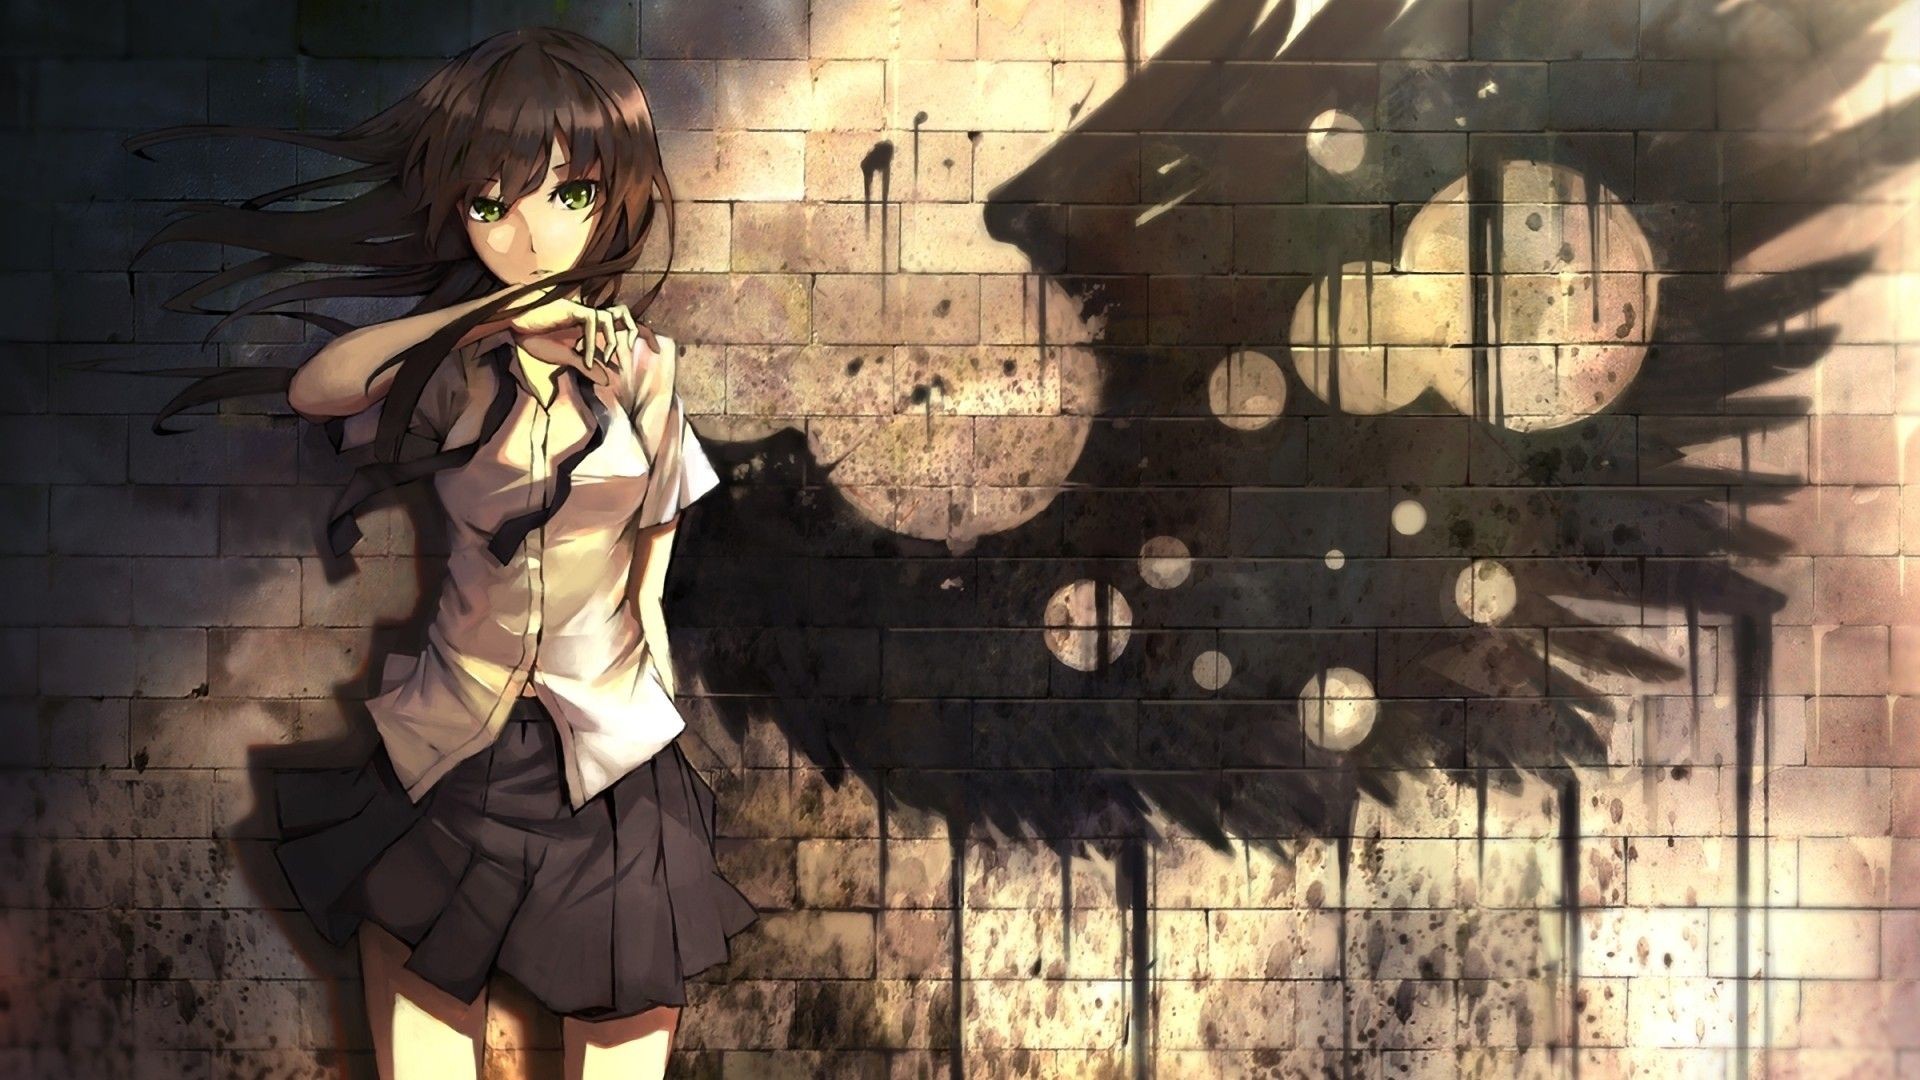 1920x1080 2048x1280 Wallpaper Anime Black And White Hd Collection With Full Pics For  ...">